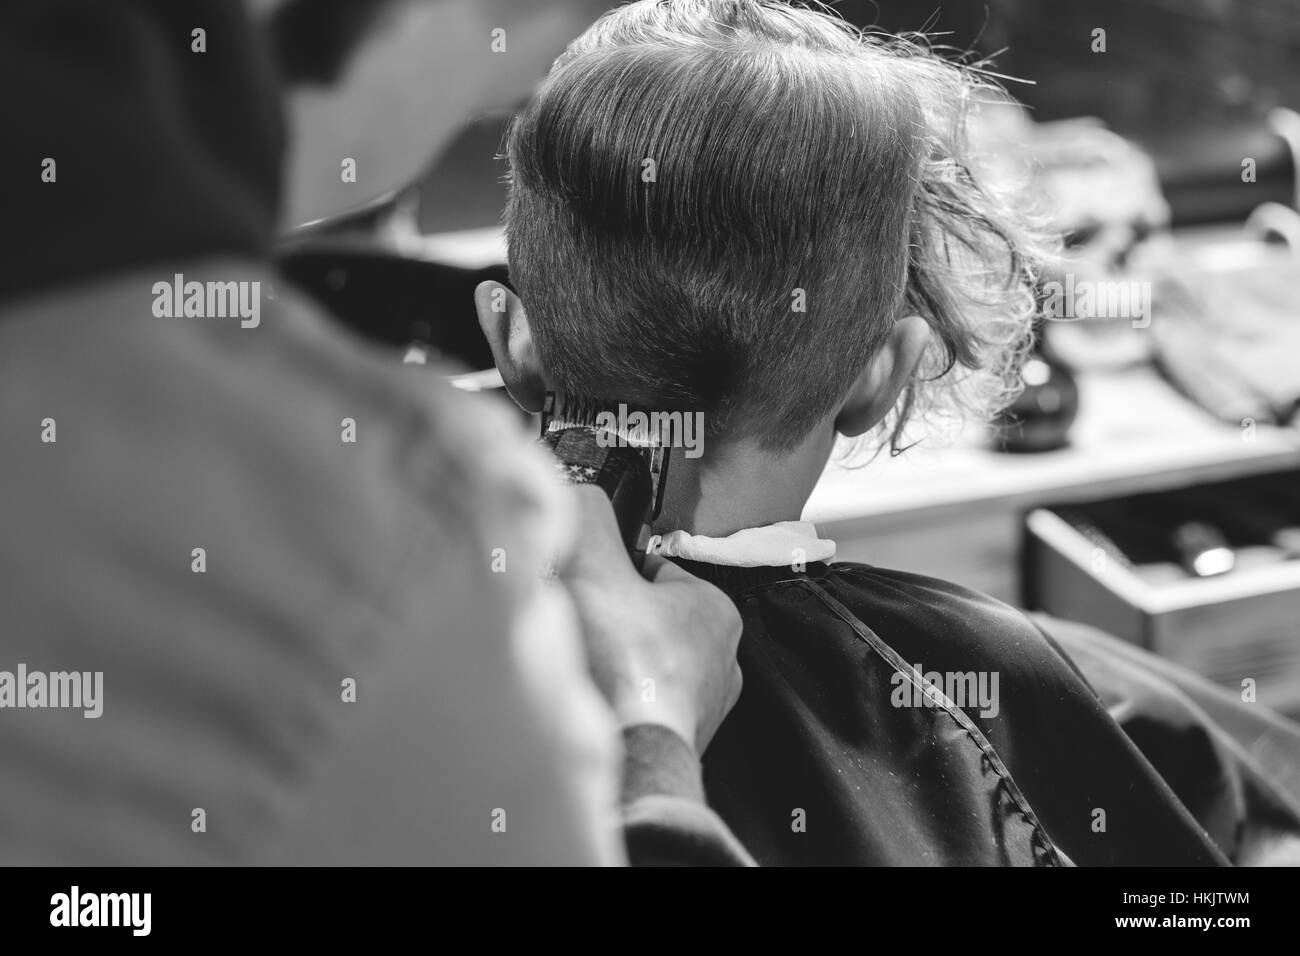 Little Boy Getting Haircut By Barber Stock Photo - Alamy